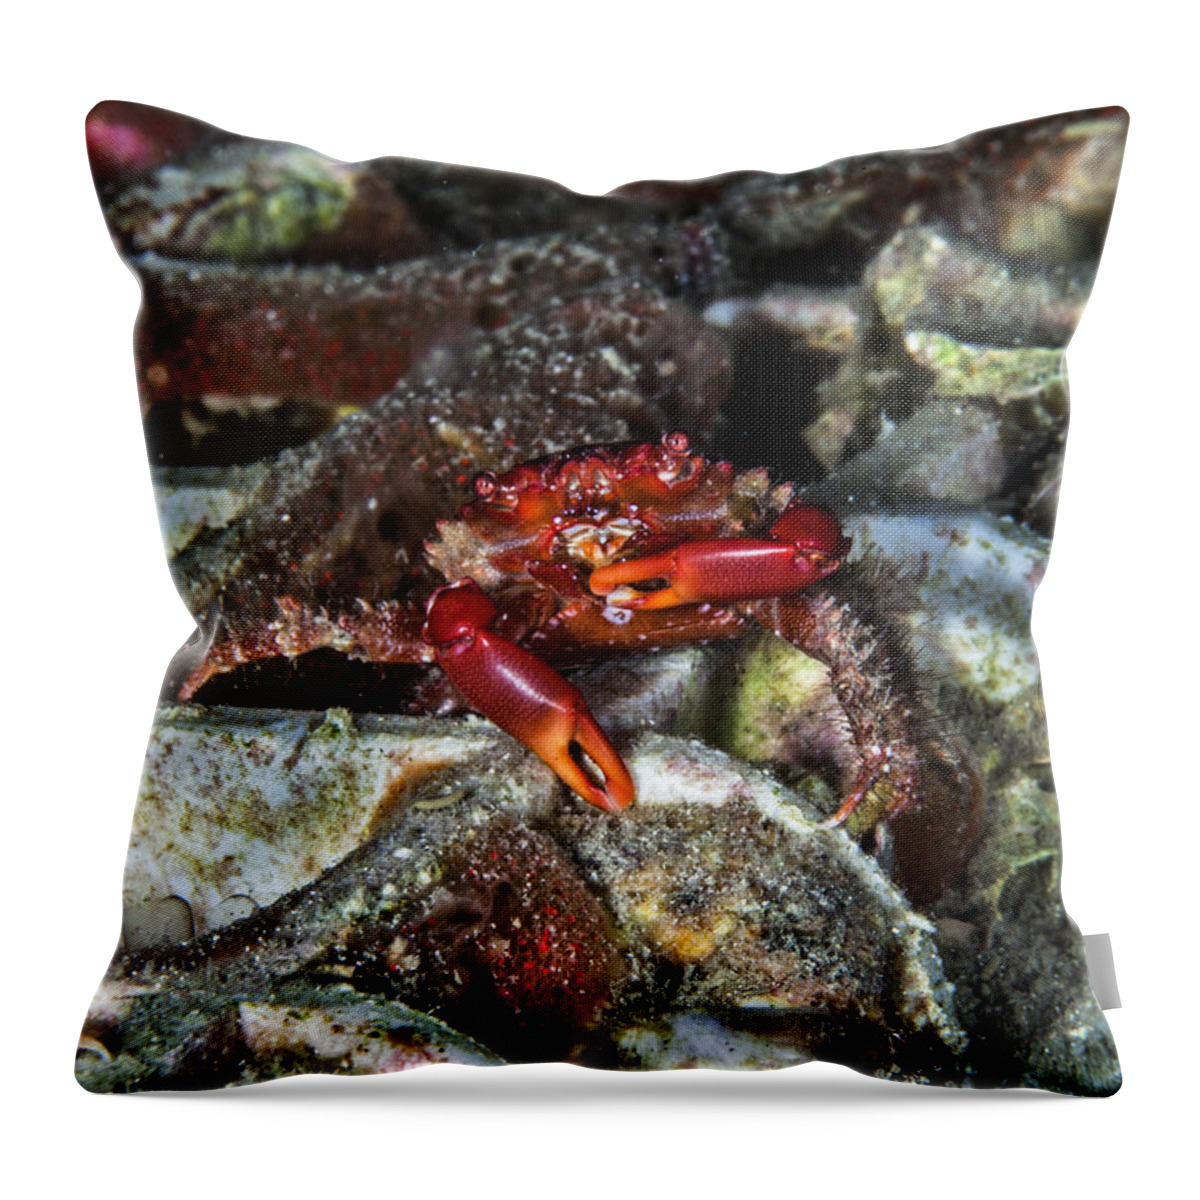 Crab Throw Pillow featuring the photograph Am I Red? by Sandra Edwards